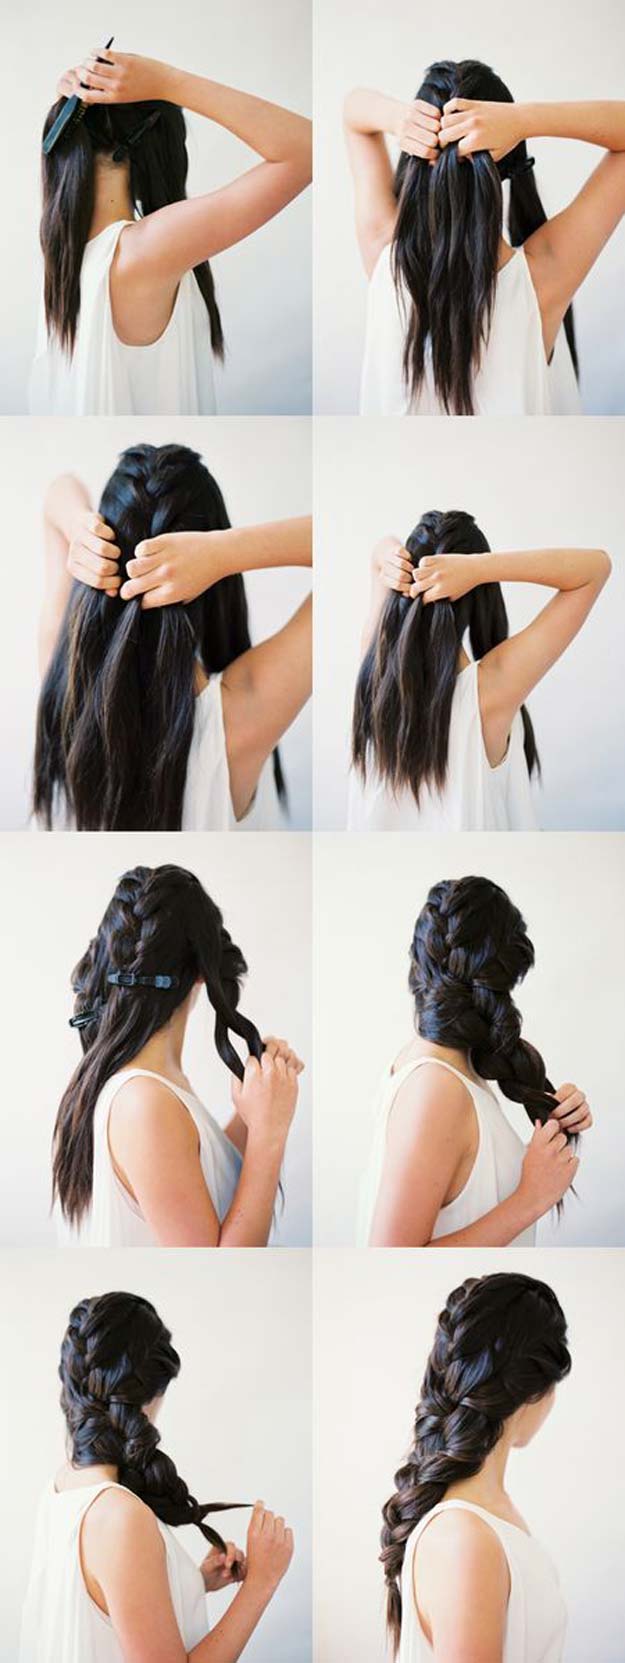 simple-and-stylish-hairstyles-for-long-hair-10_10 Simple and stylish hairstyles for long hair